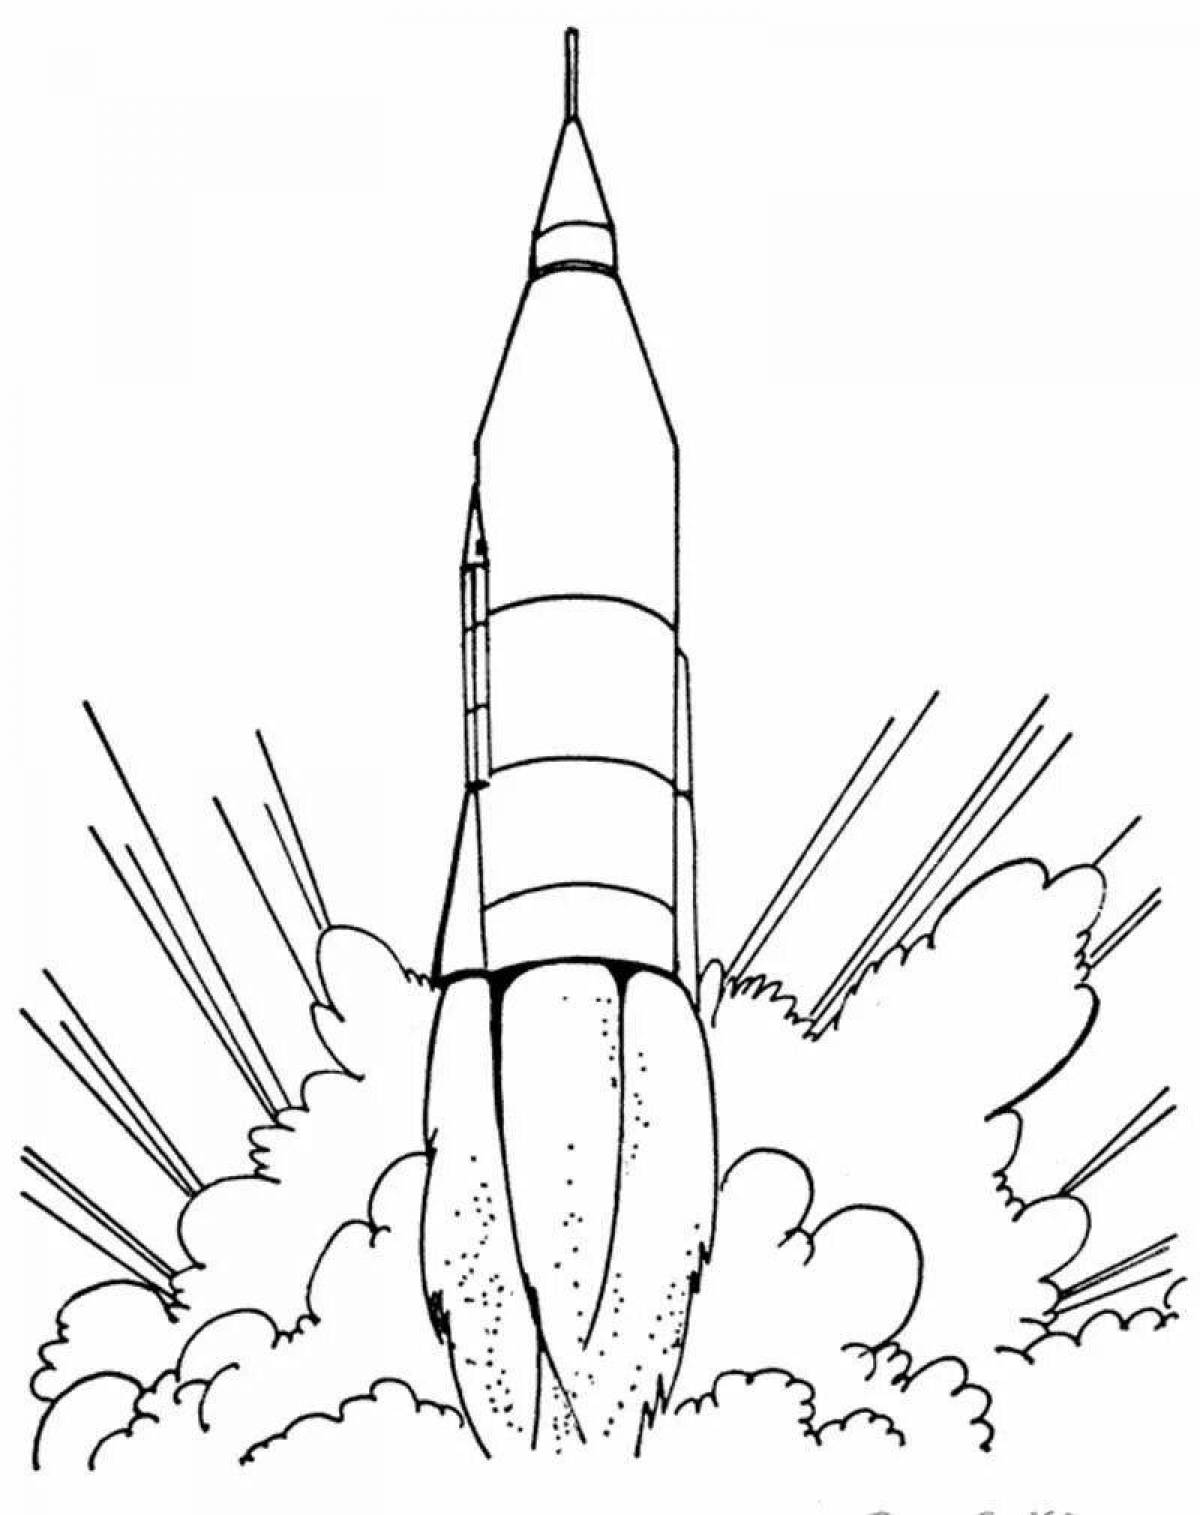 Colouring bright space rocket